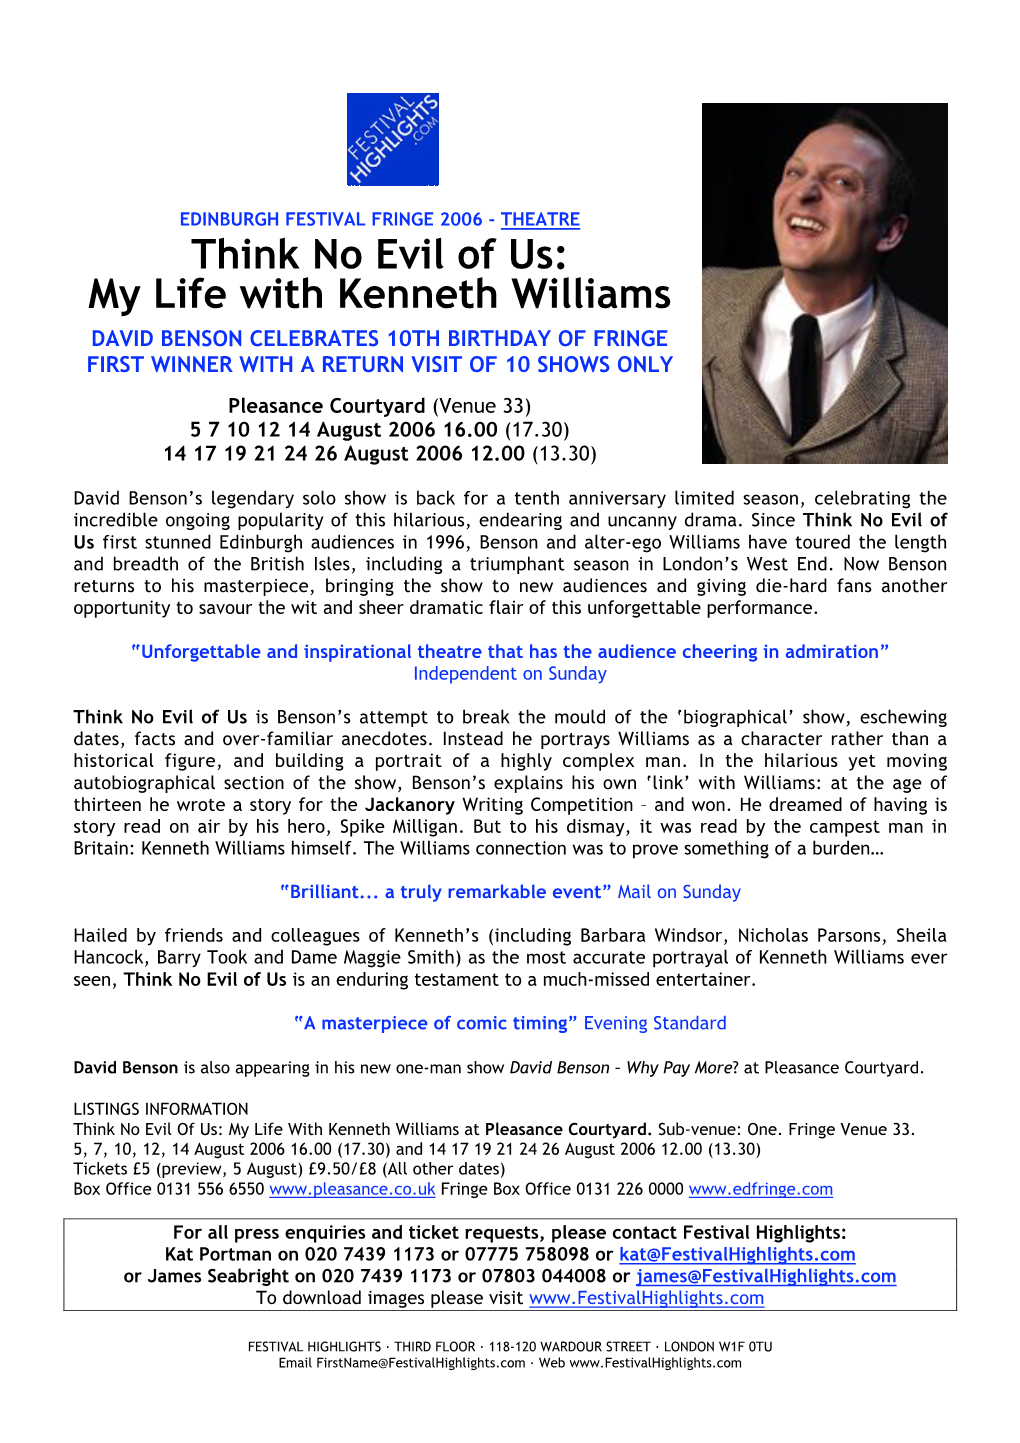 Think No Evil of Us: My Life with Kenneth Williams